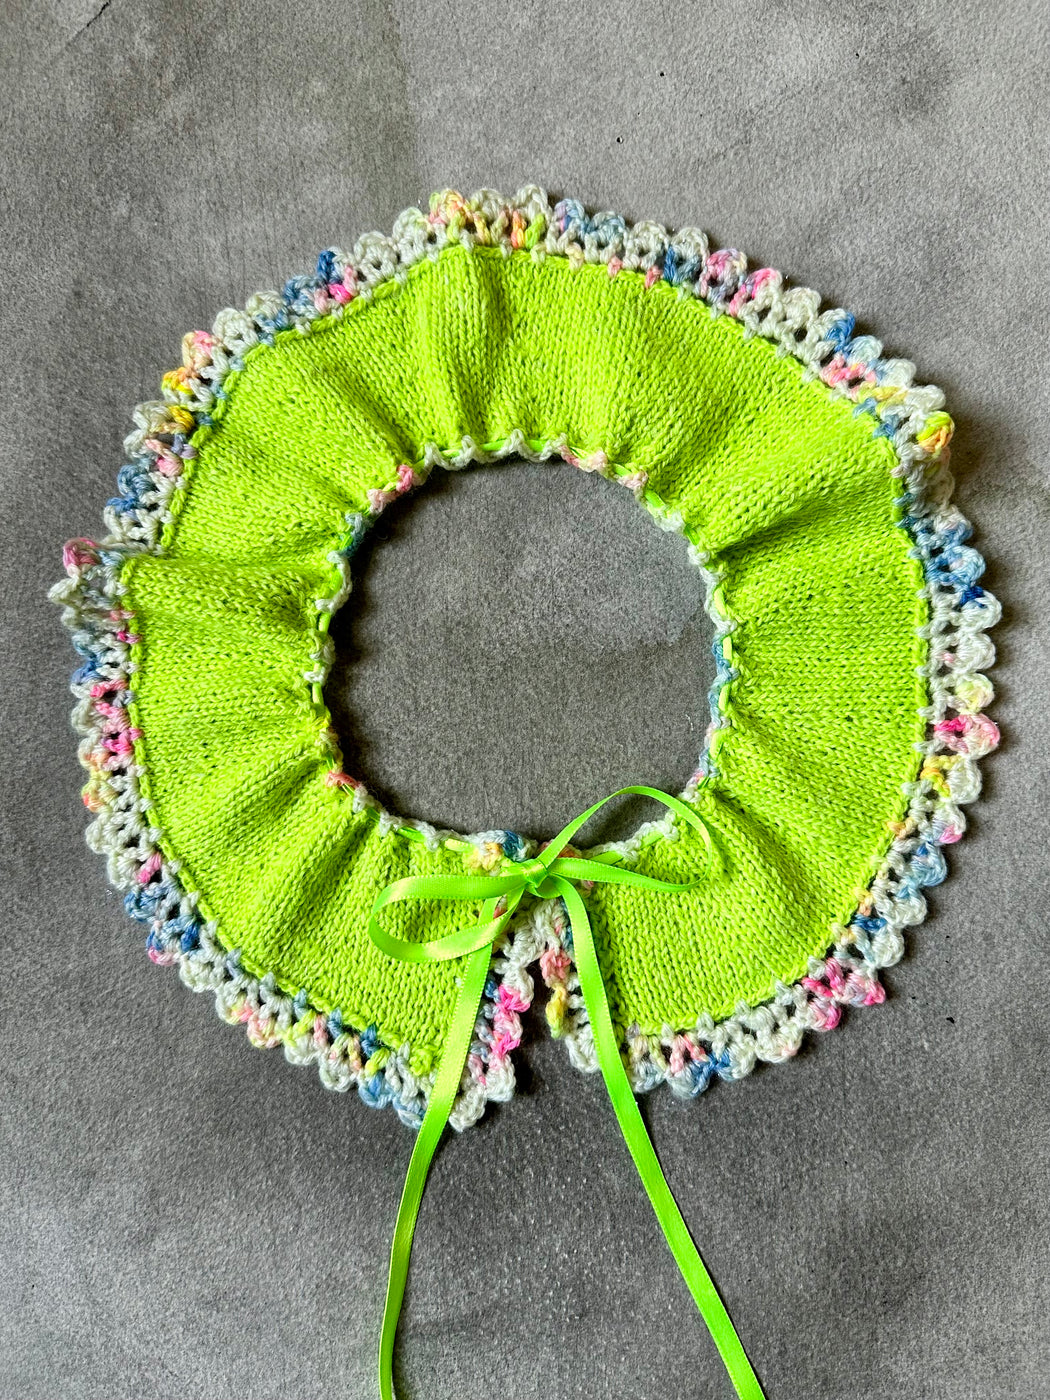 "Ribbon" Hand-Knitted Collar by Albo - Neon